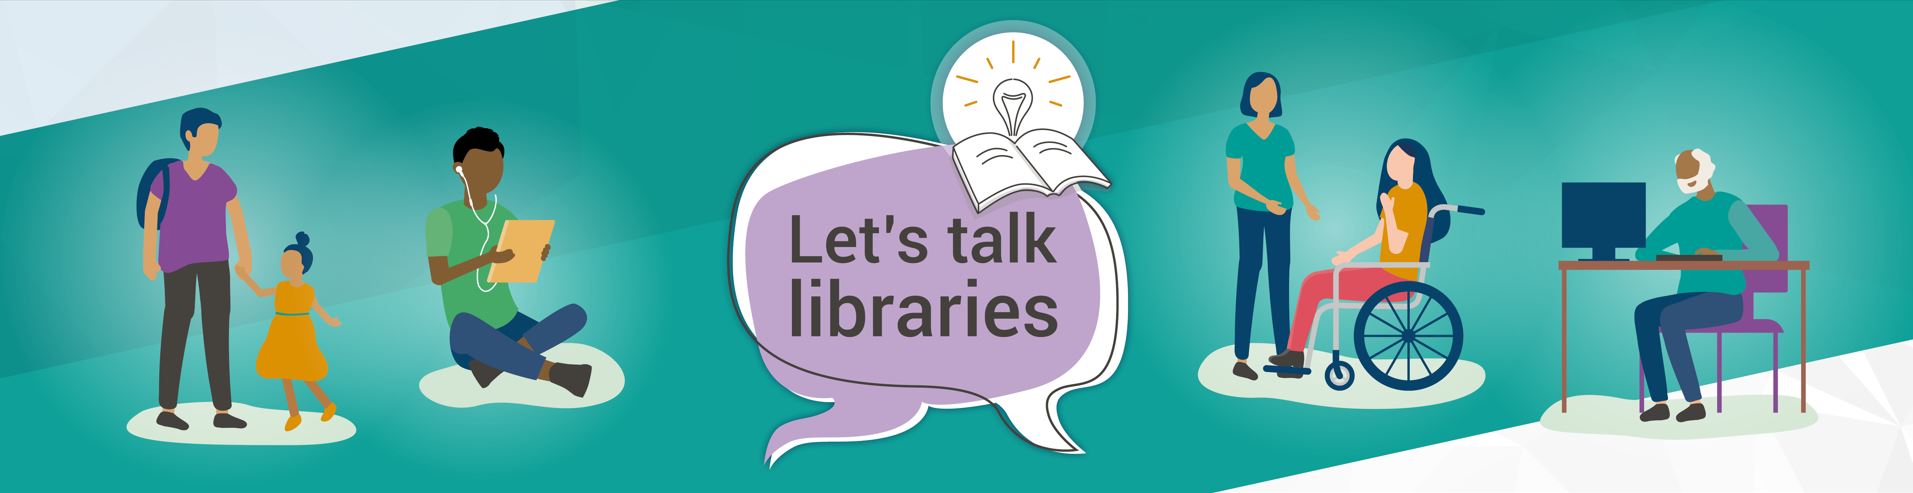 This image shows the Let's Talk Libraries logo.